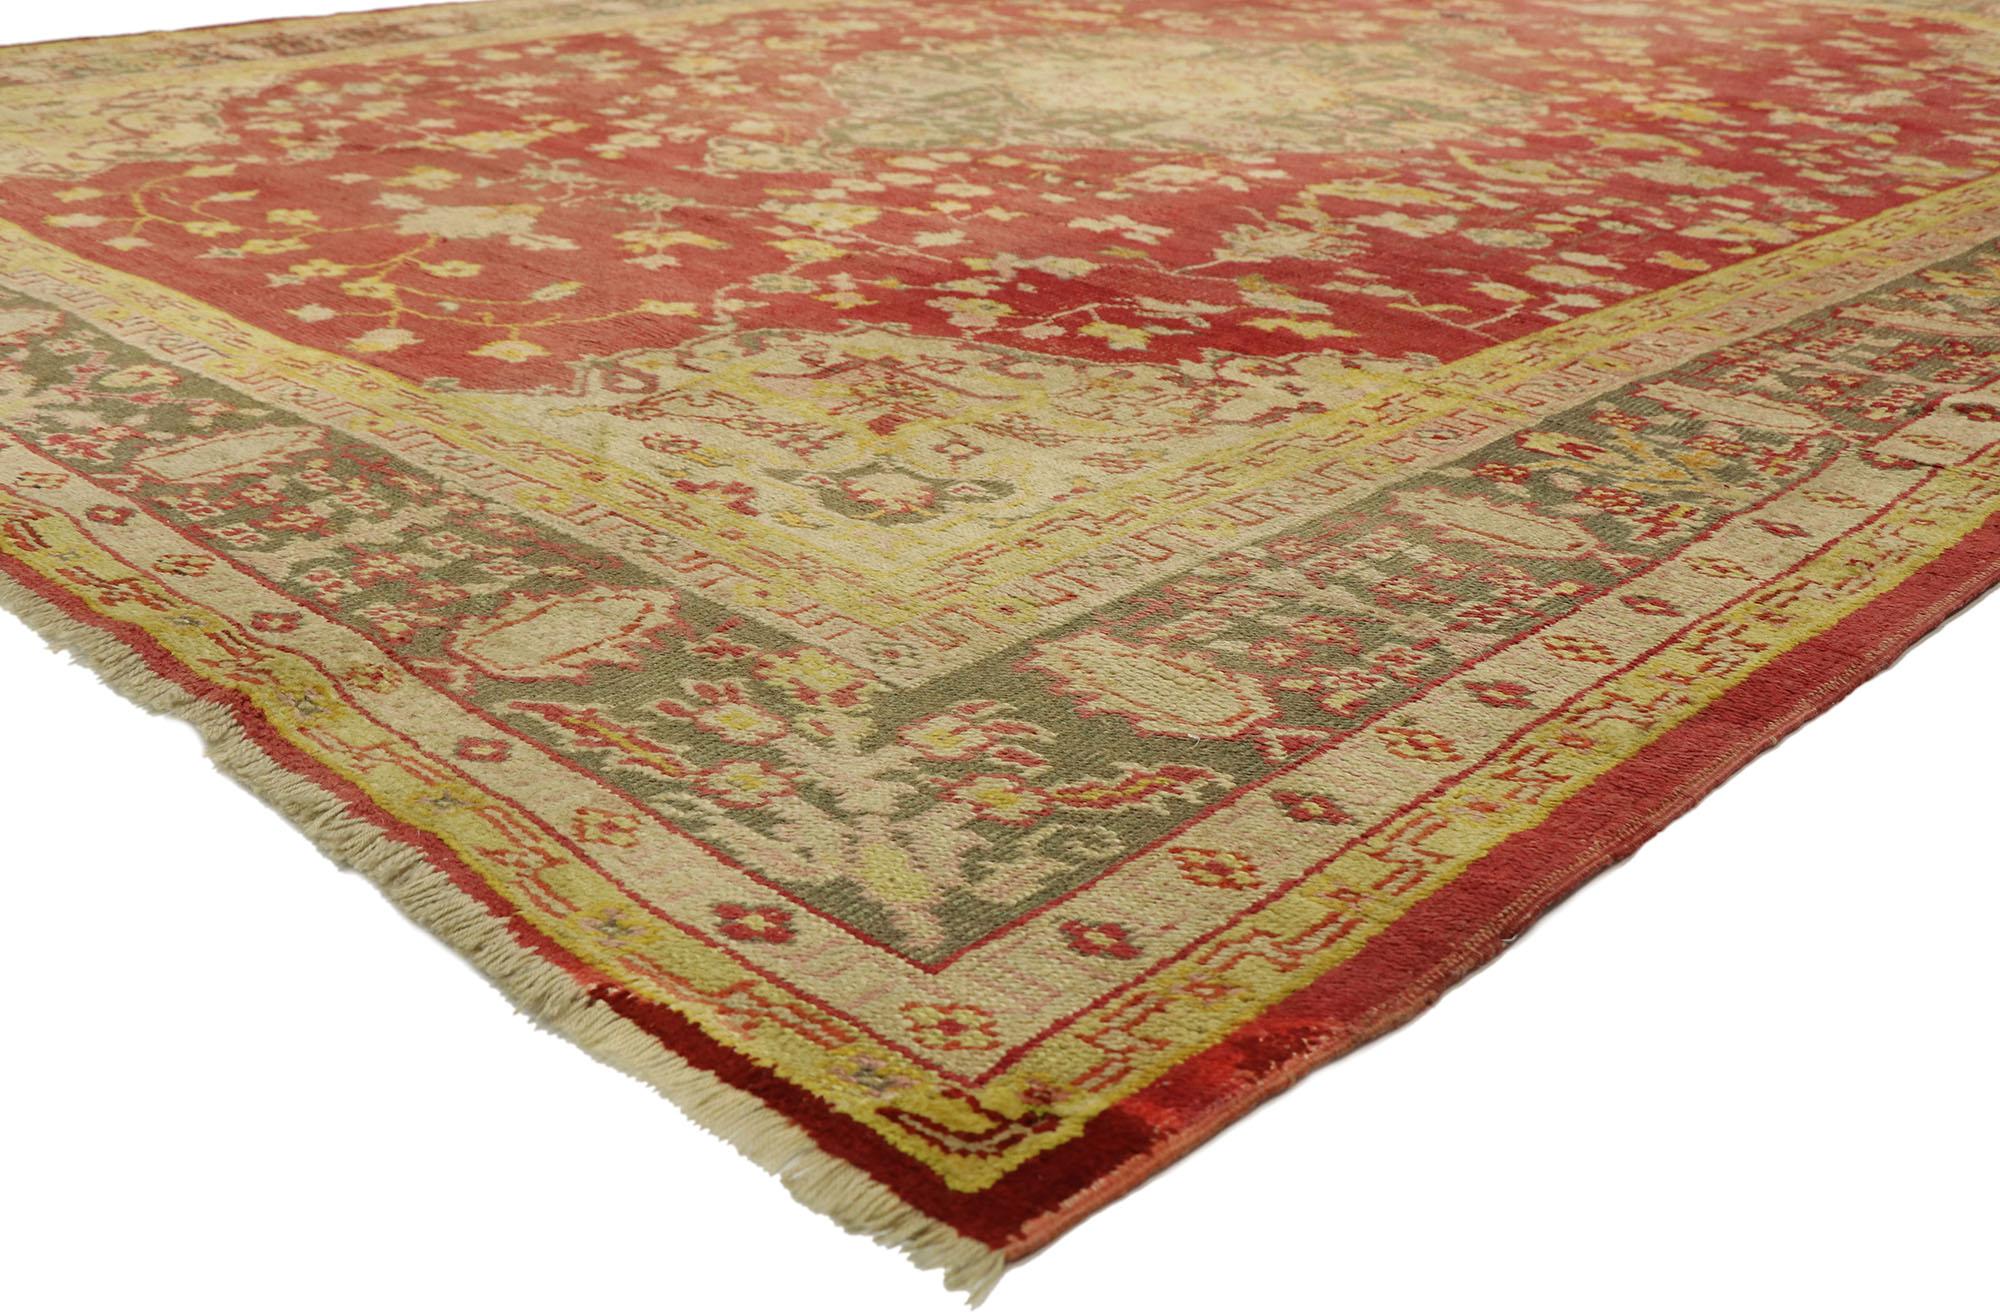 Wool Distressed Antique Turkish Oushak Rug, 9'07 x 12'01 For Sale